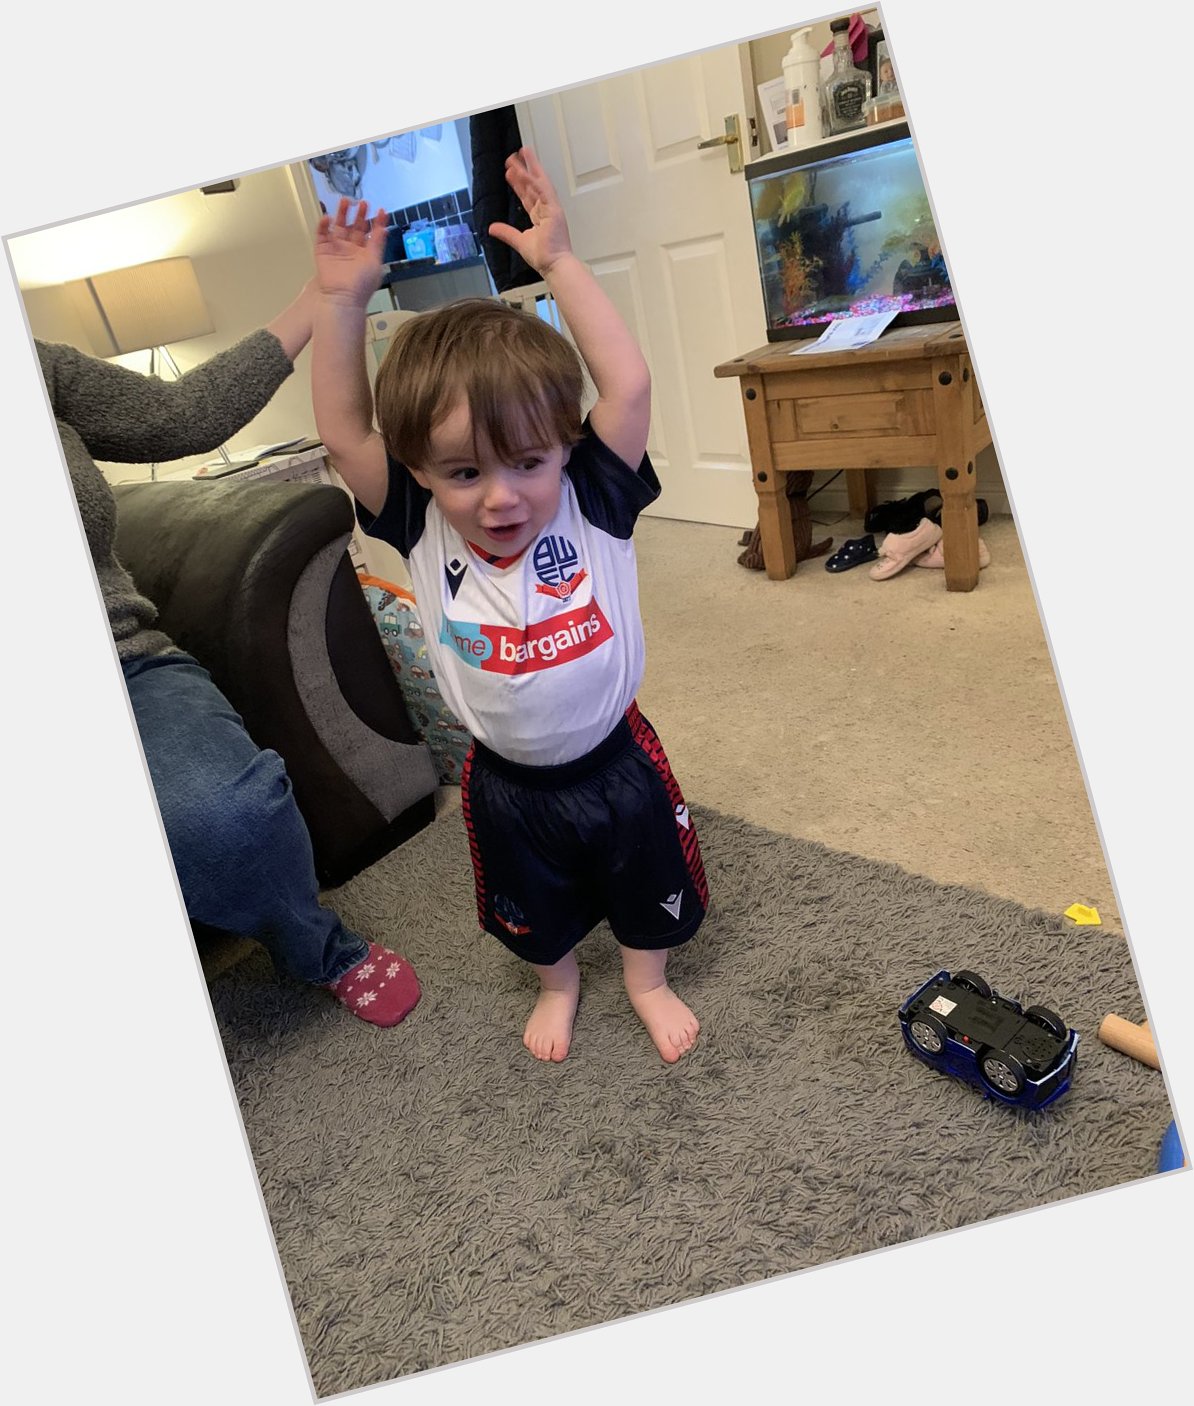  Happy birthday legend. This is Harry my son watching you, celebrating your goals on the TV. 